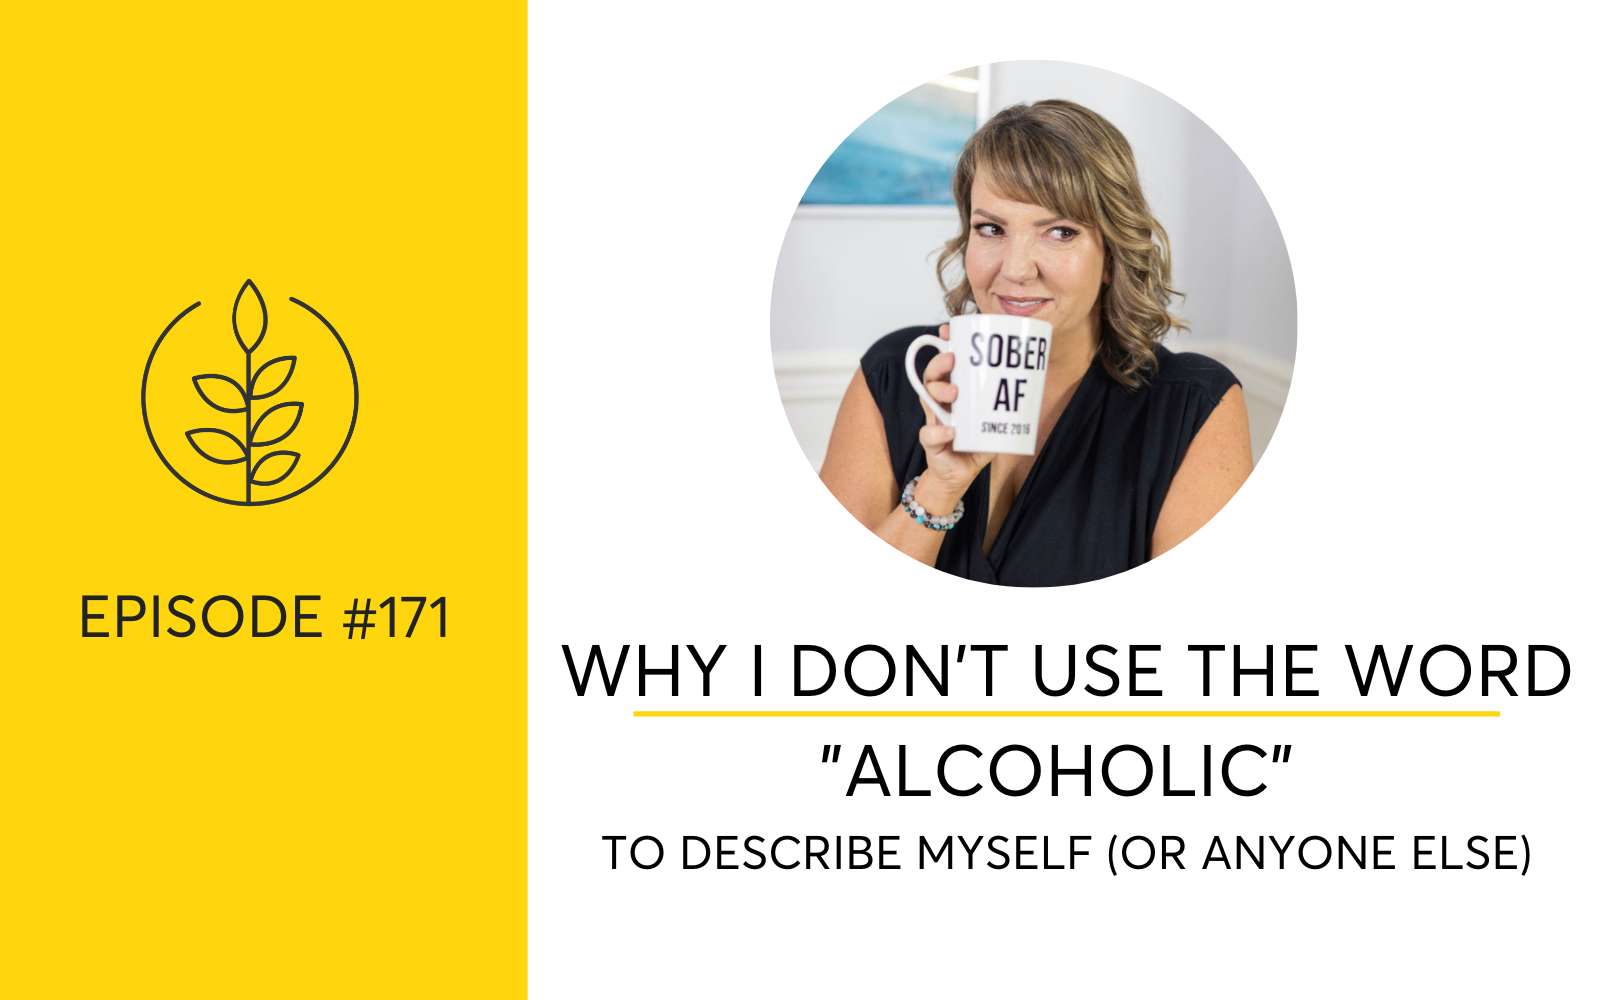 Why I Don’t Use The Word “Alcoholic” To Describe Myself (Or Anyone Else)